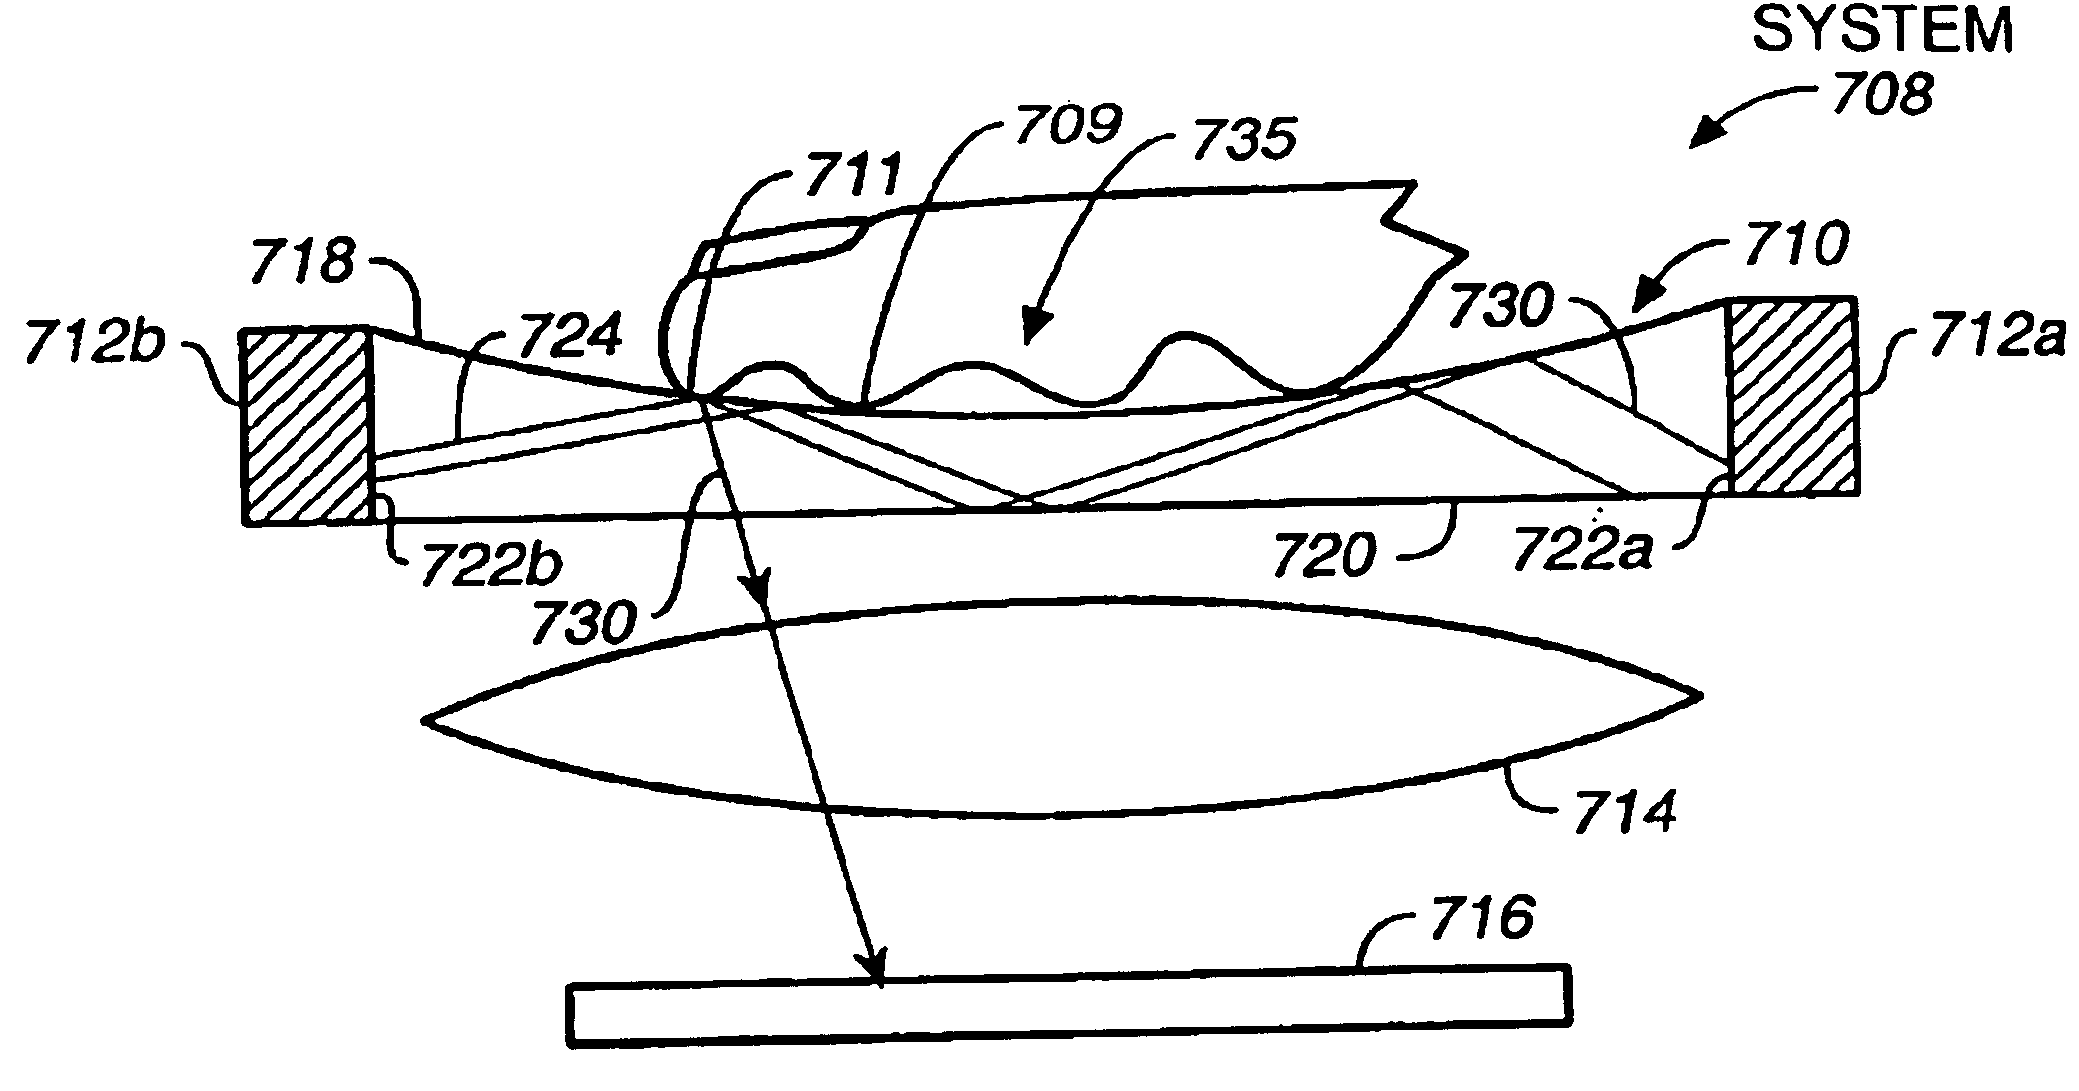 High contrast, low distortion optical acquisition system for image capturing